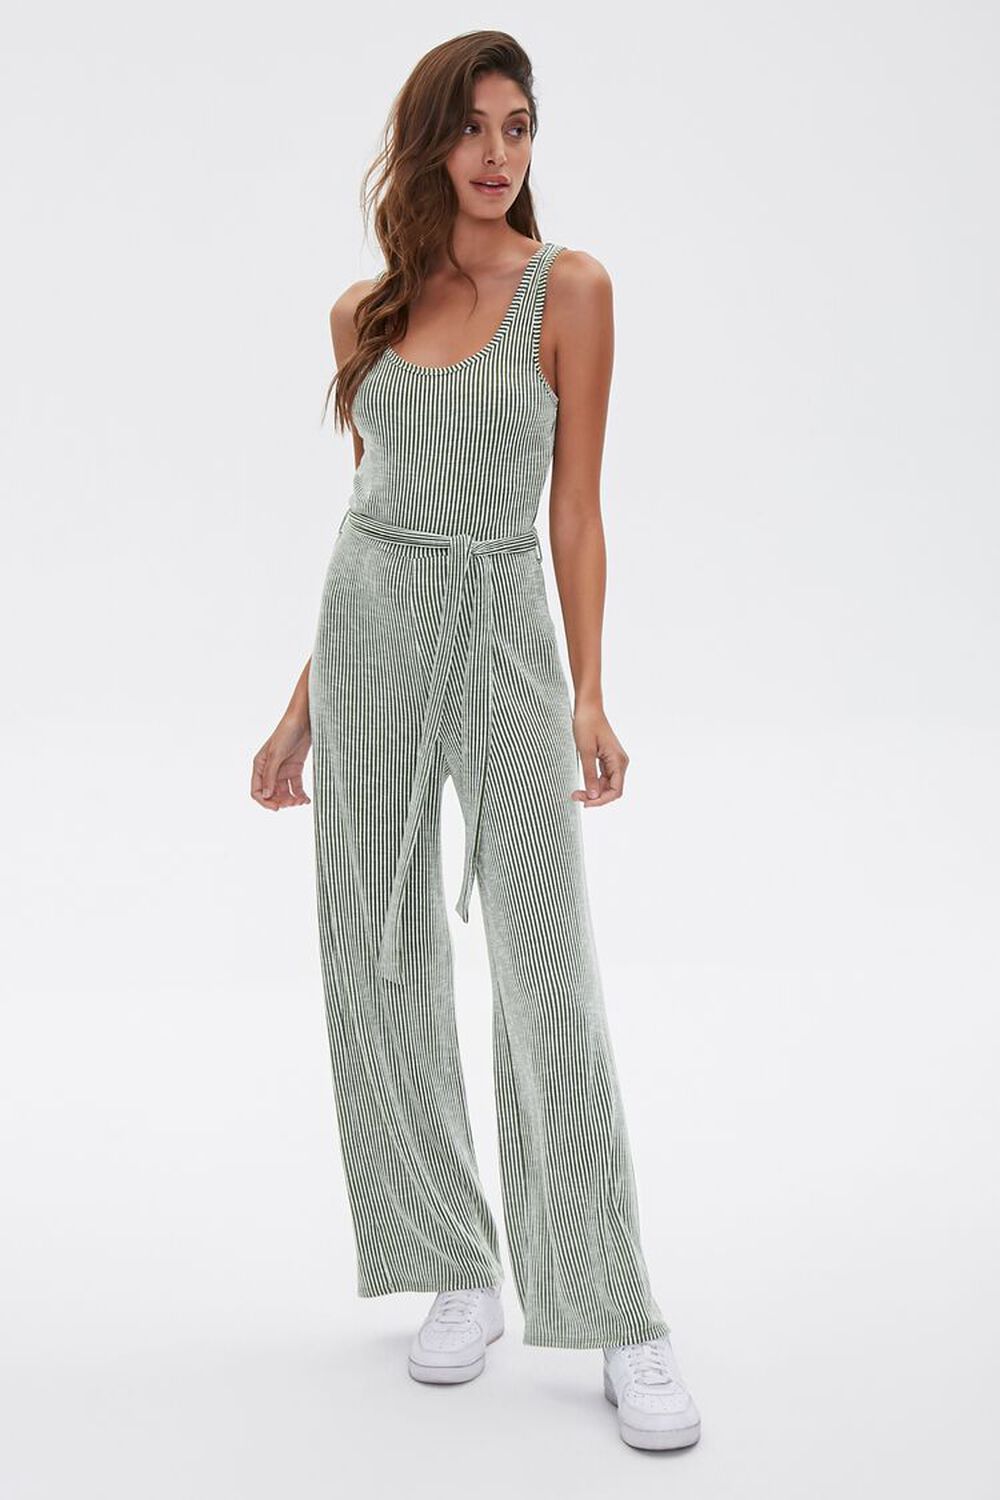 OLIVE/CREAM Ribbed Pinstriped Jumpsuit, image 1